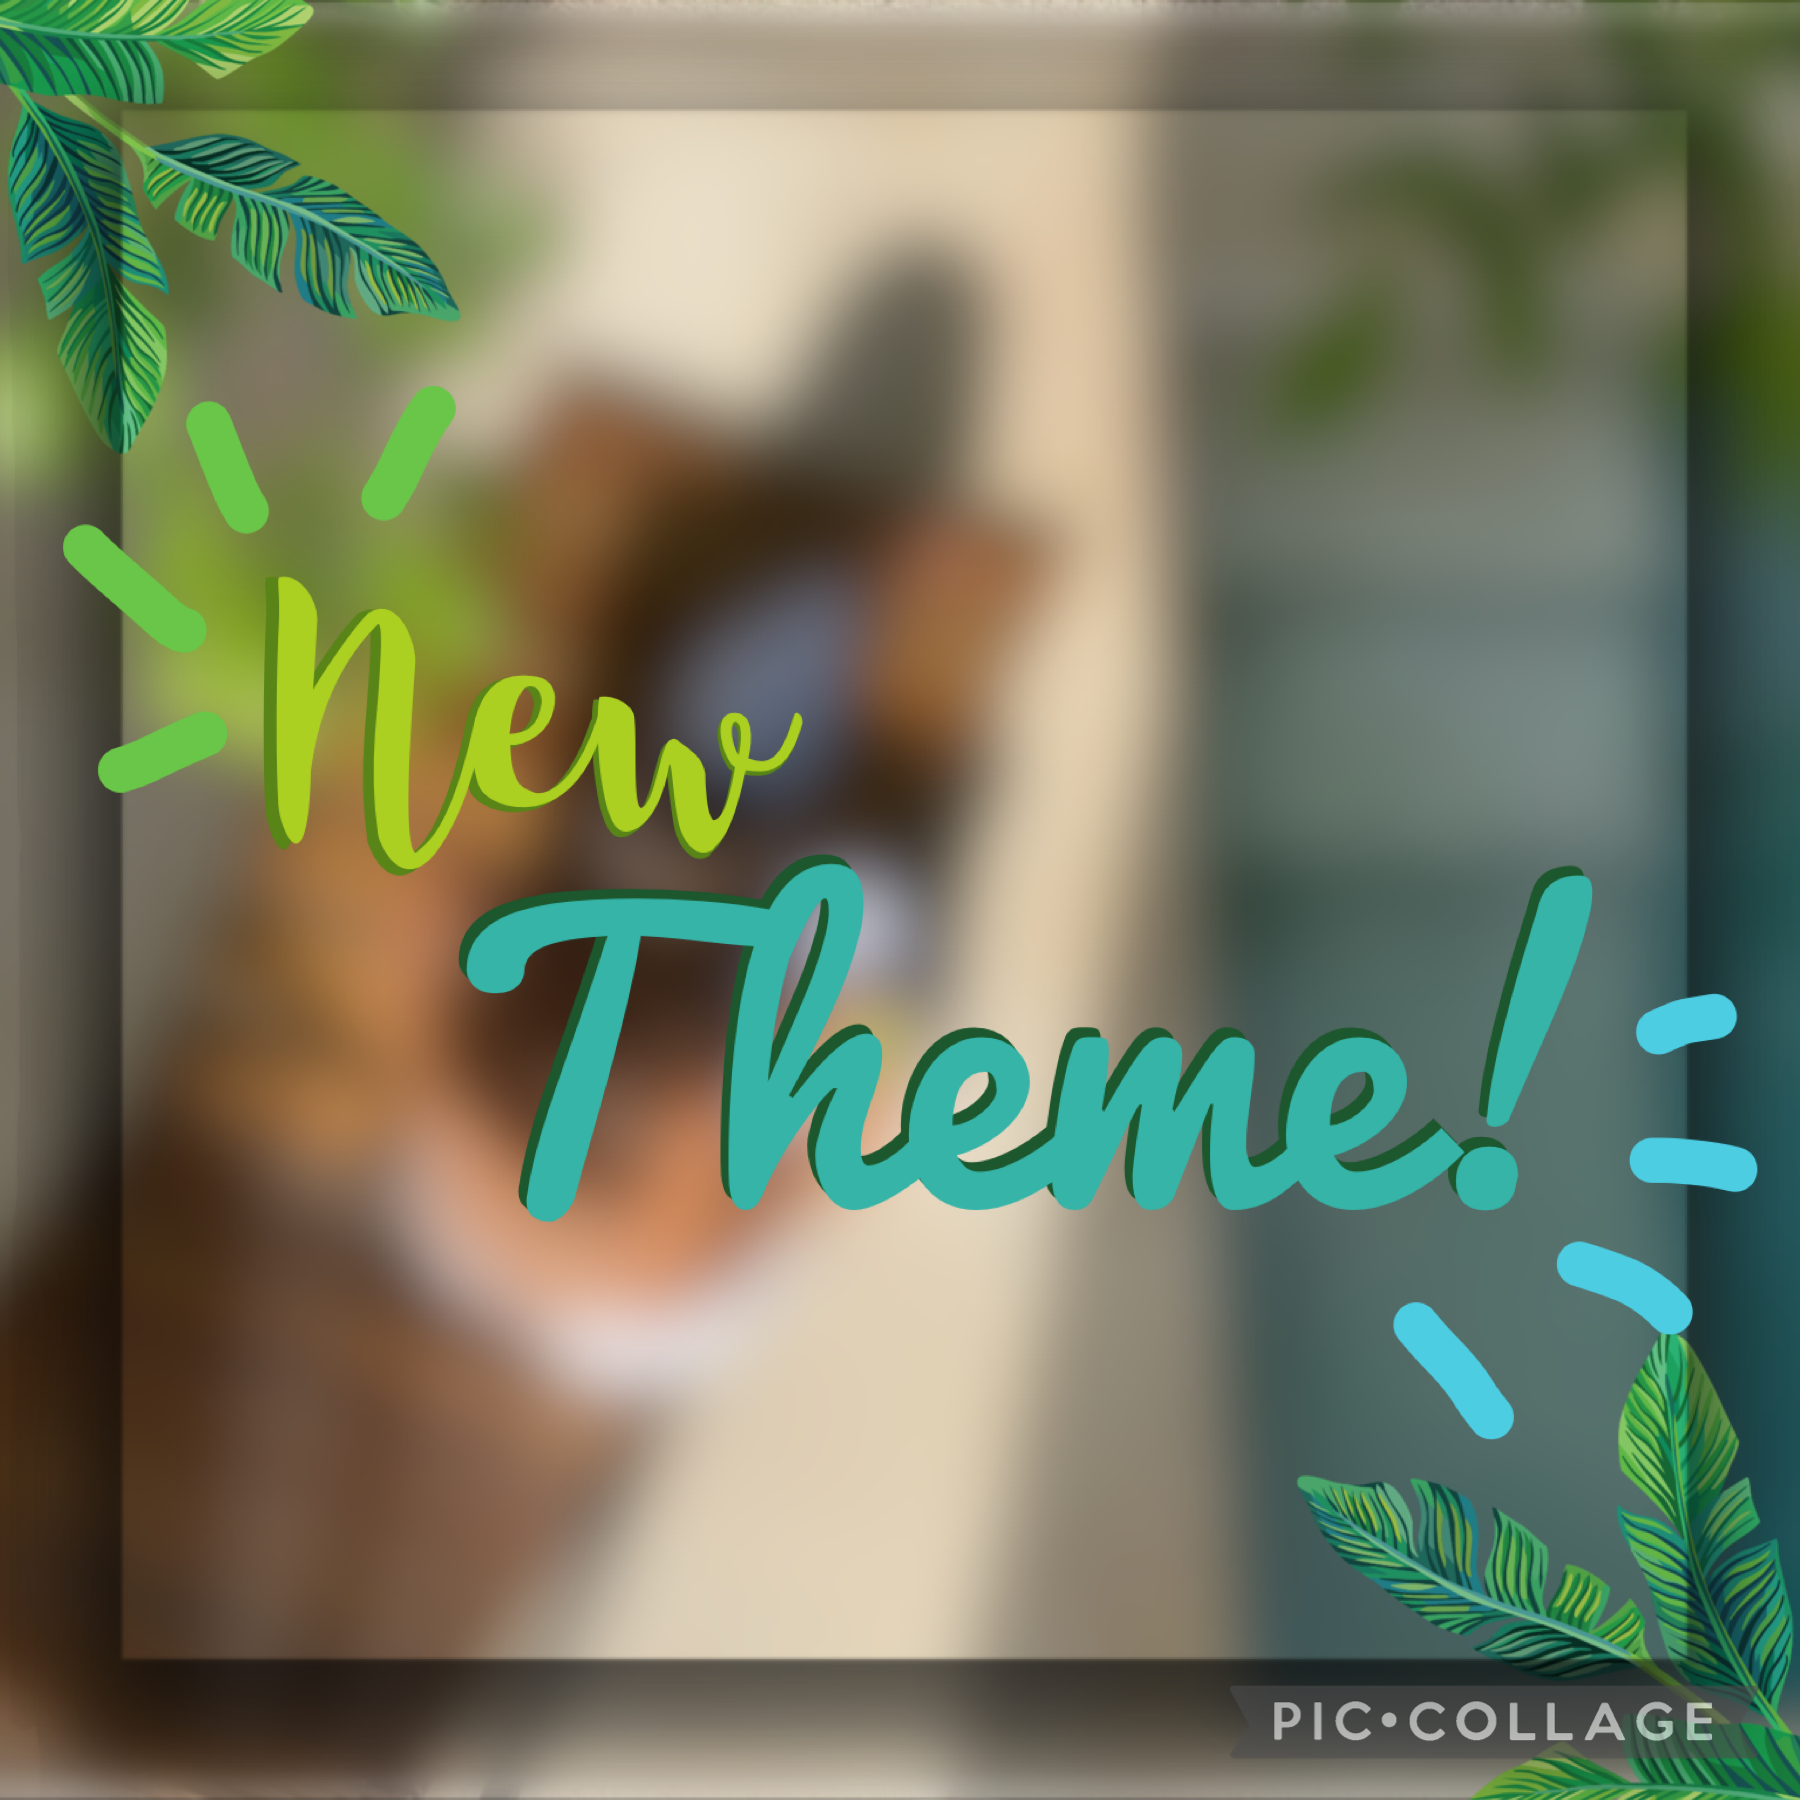 🌴 20/10/22 (T A P) 🌴
~ new theme! ~
~ summer ~